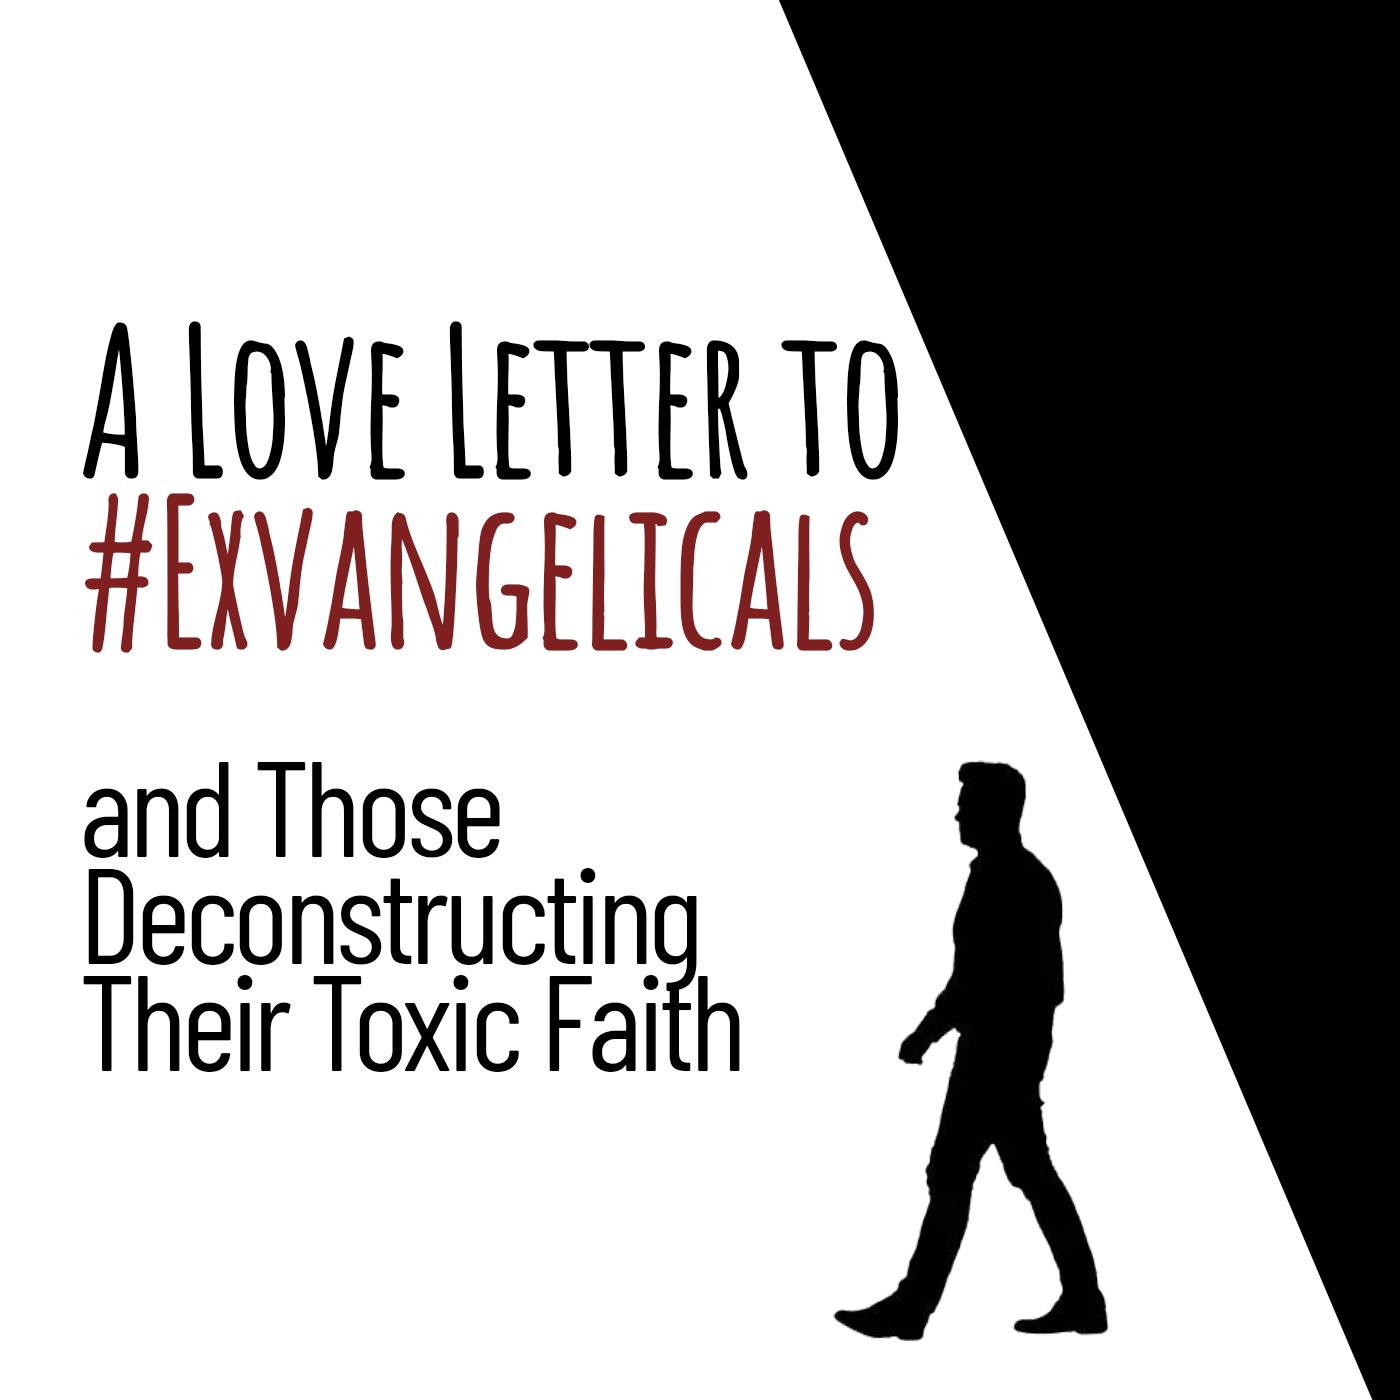 A Love Letter to #Exvangelicals and Those Deconstructing their Toxic Faith